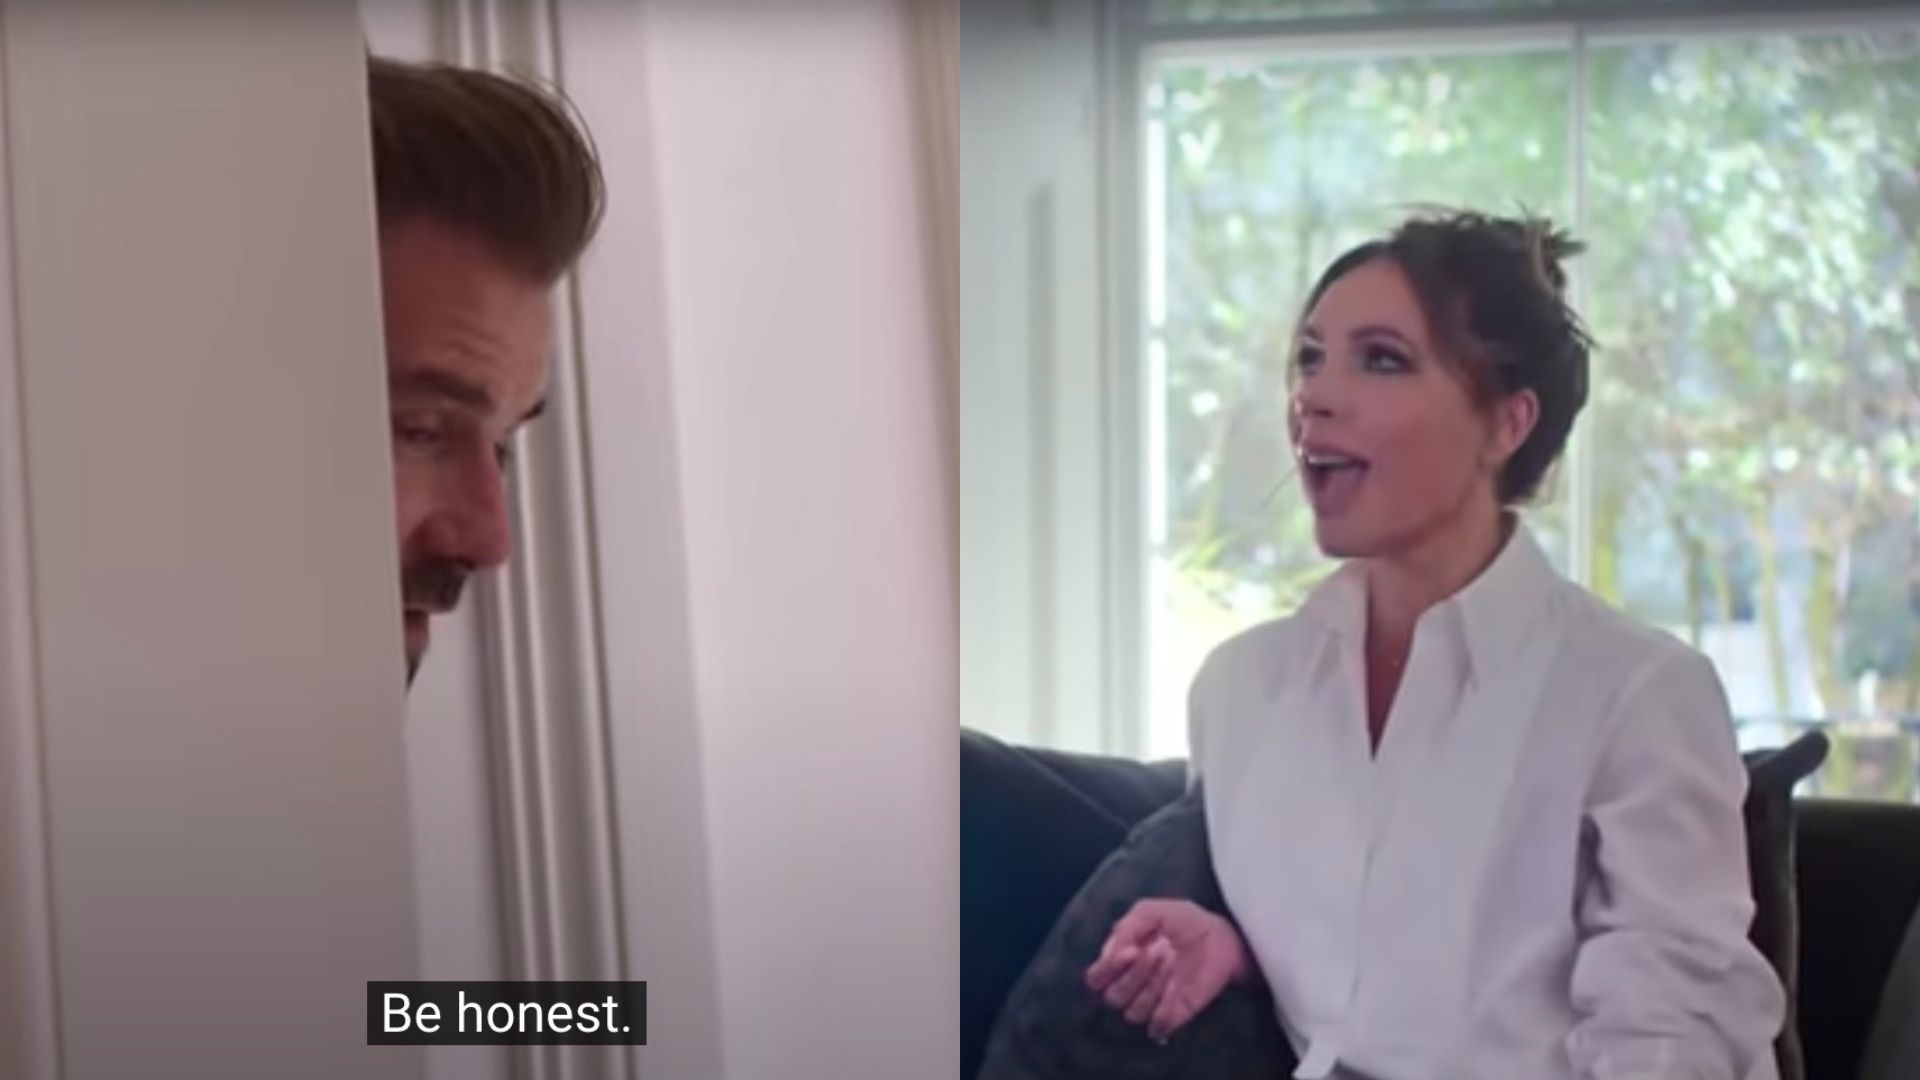 ‘What Car Did Your Dad Drive?’ David Beckham Calls Out Posh Spice’s ‘Working Class Upbringing’ in New Doc